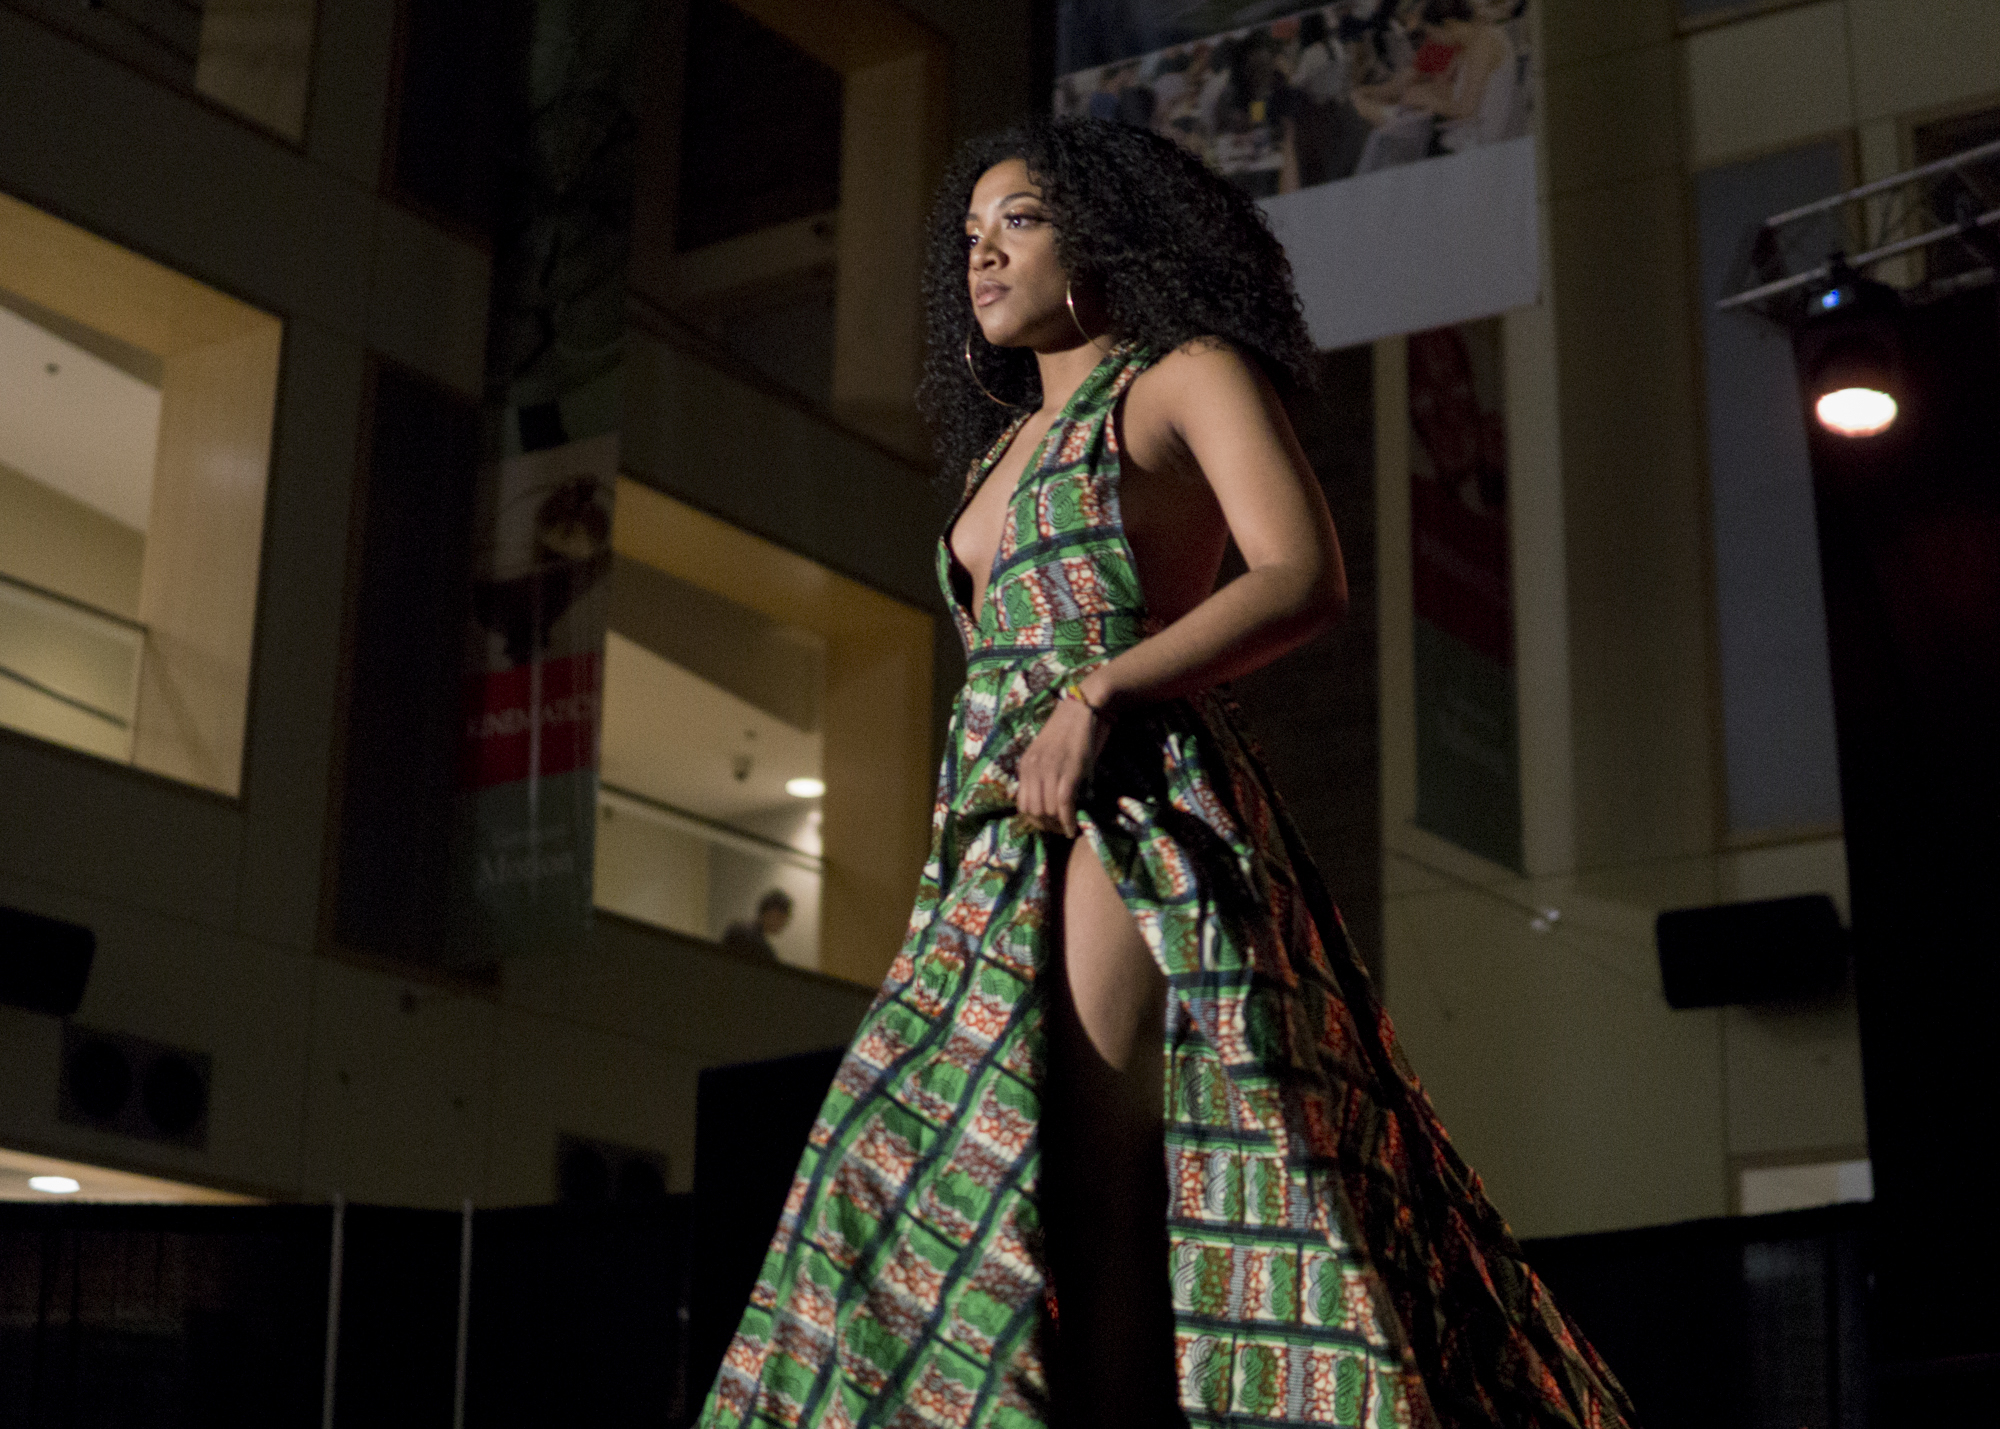 Fashion Show Celebrates Culture Of Africa And African Diaspora The